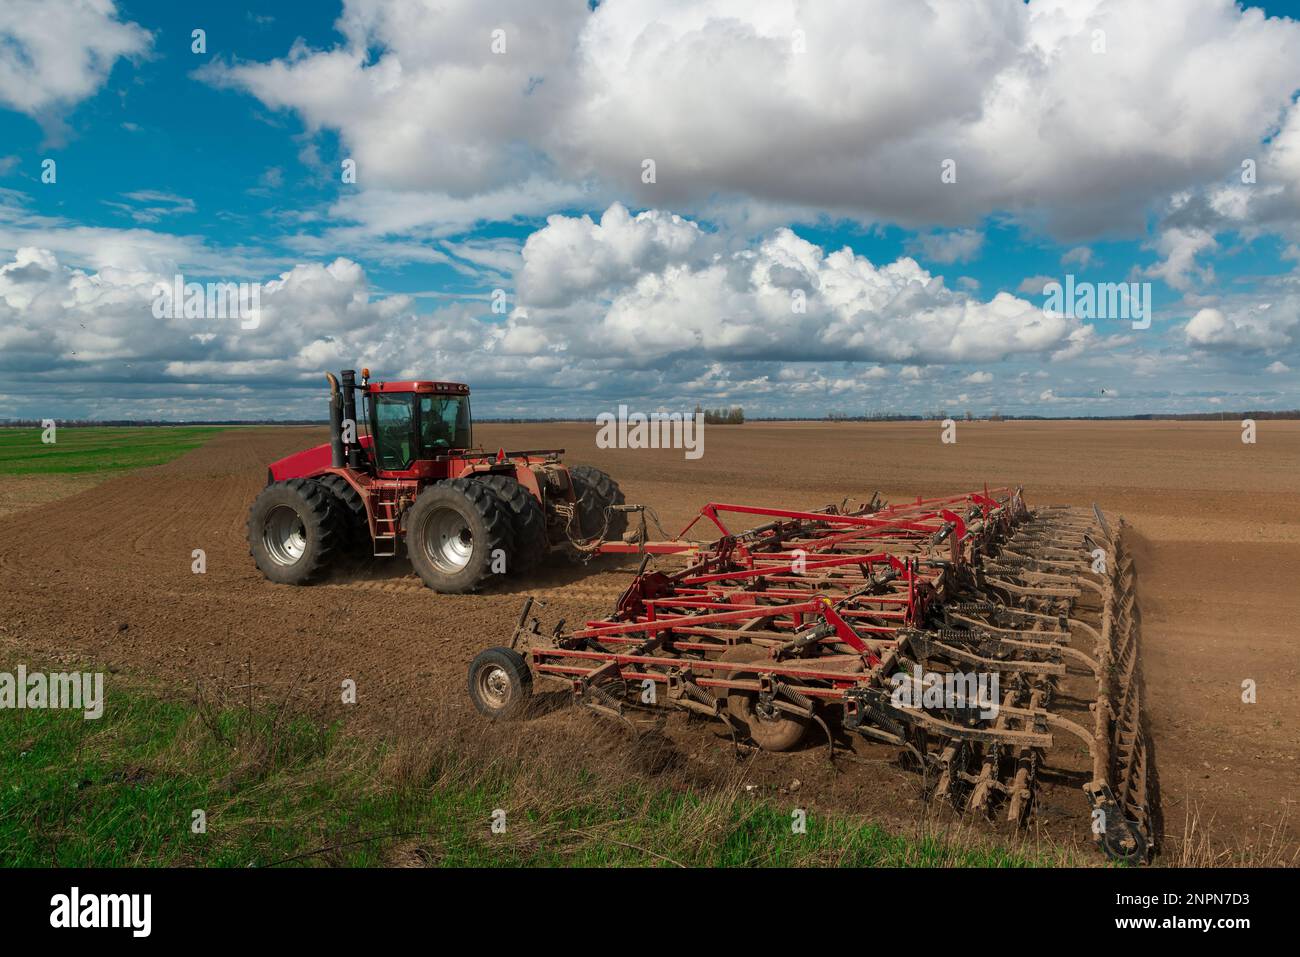 Red tractor plows the farm field. Spring agricultural works in Ukraine. Cultivated soil and sky with clouds. Countryside landscape Stock Photo